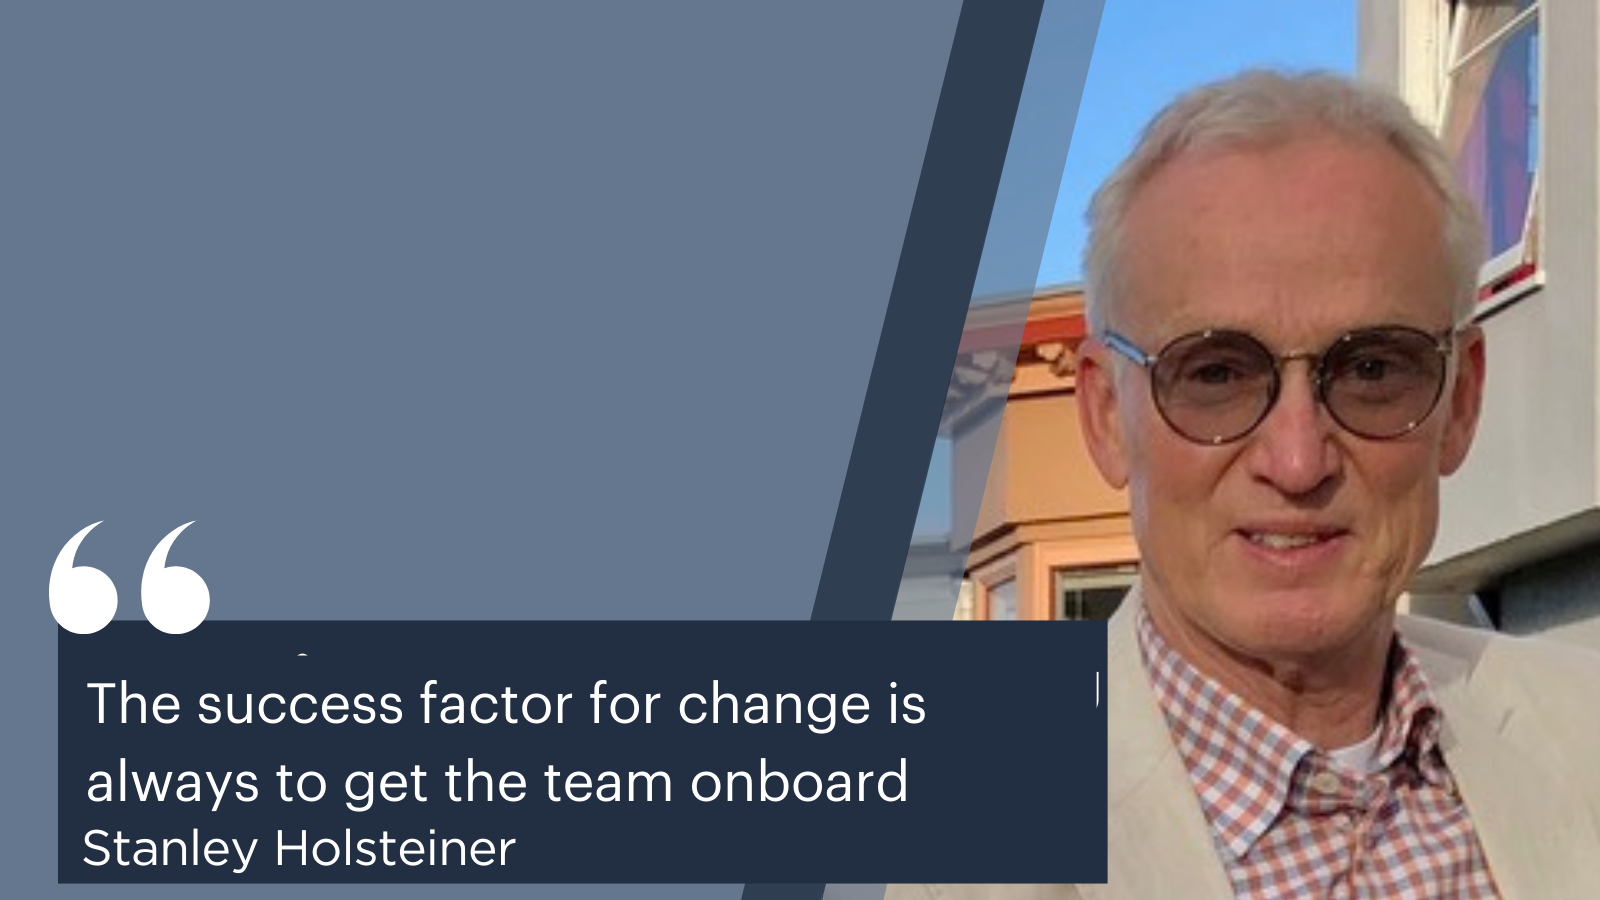 ”The success factor for change is always to get the team onboard”